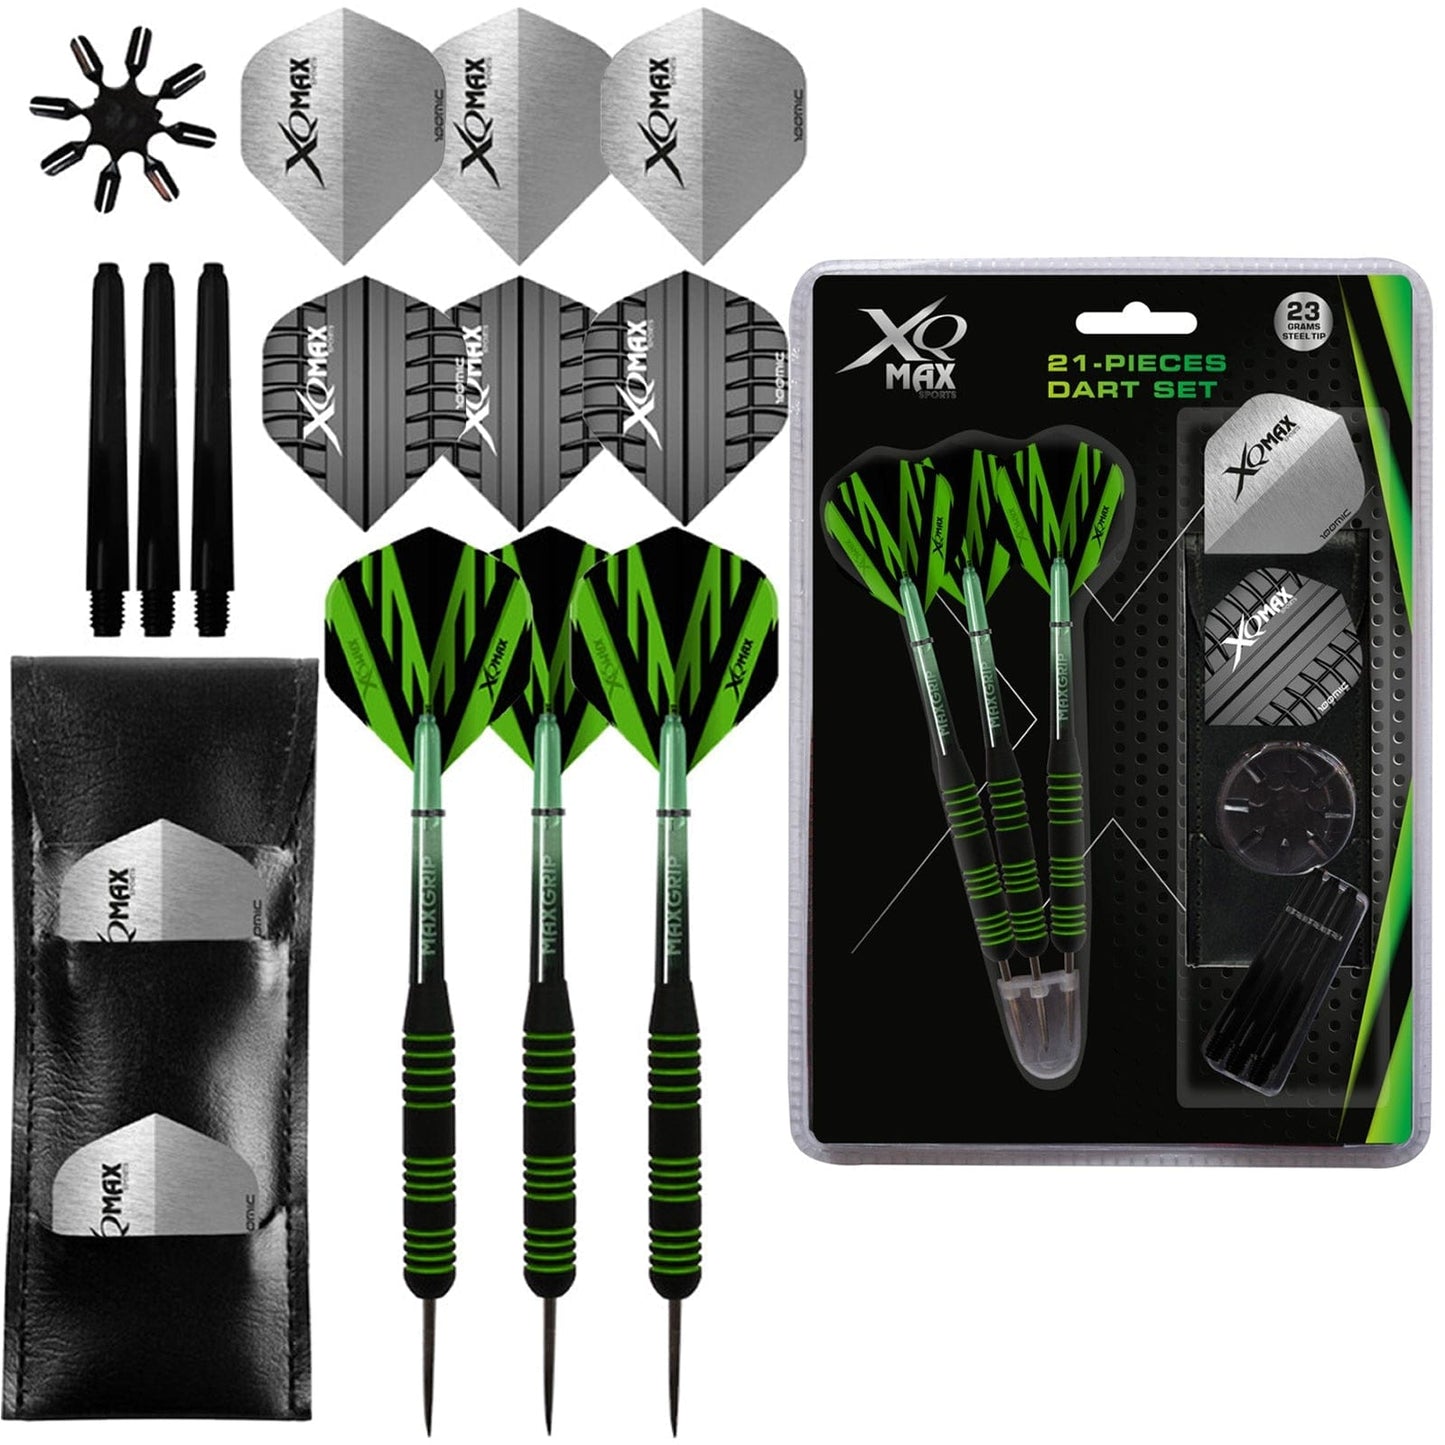 XQMax Steel Tip Darts - Black Coated Rubberised Steel - includes Case and Extra Accessories - 23g 23g